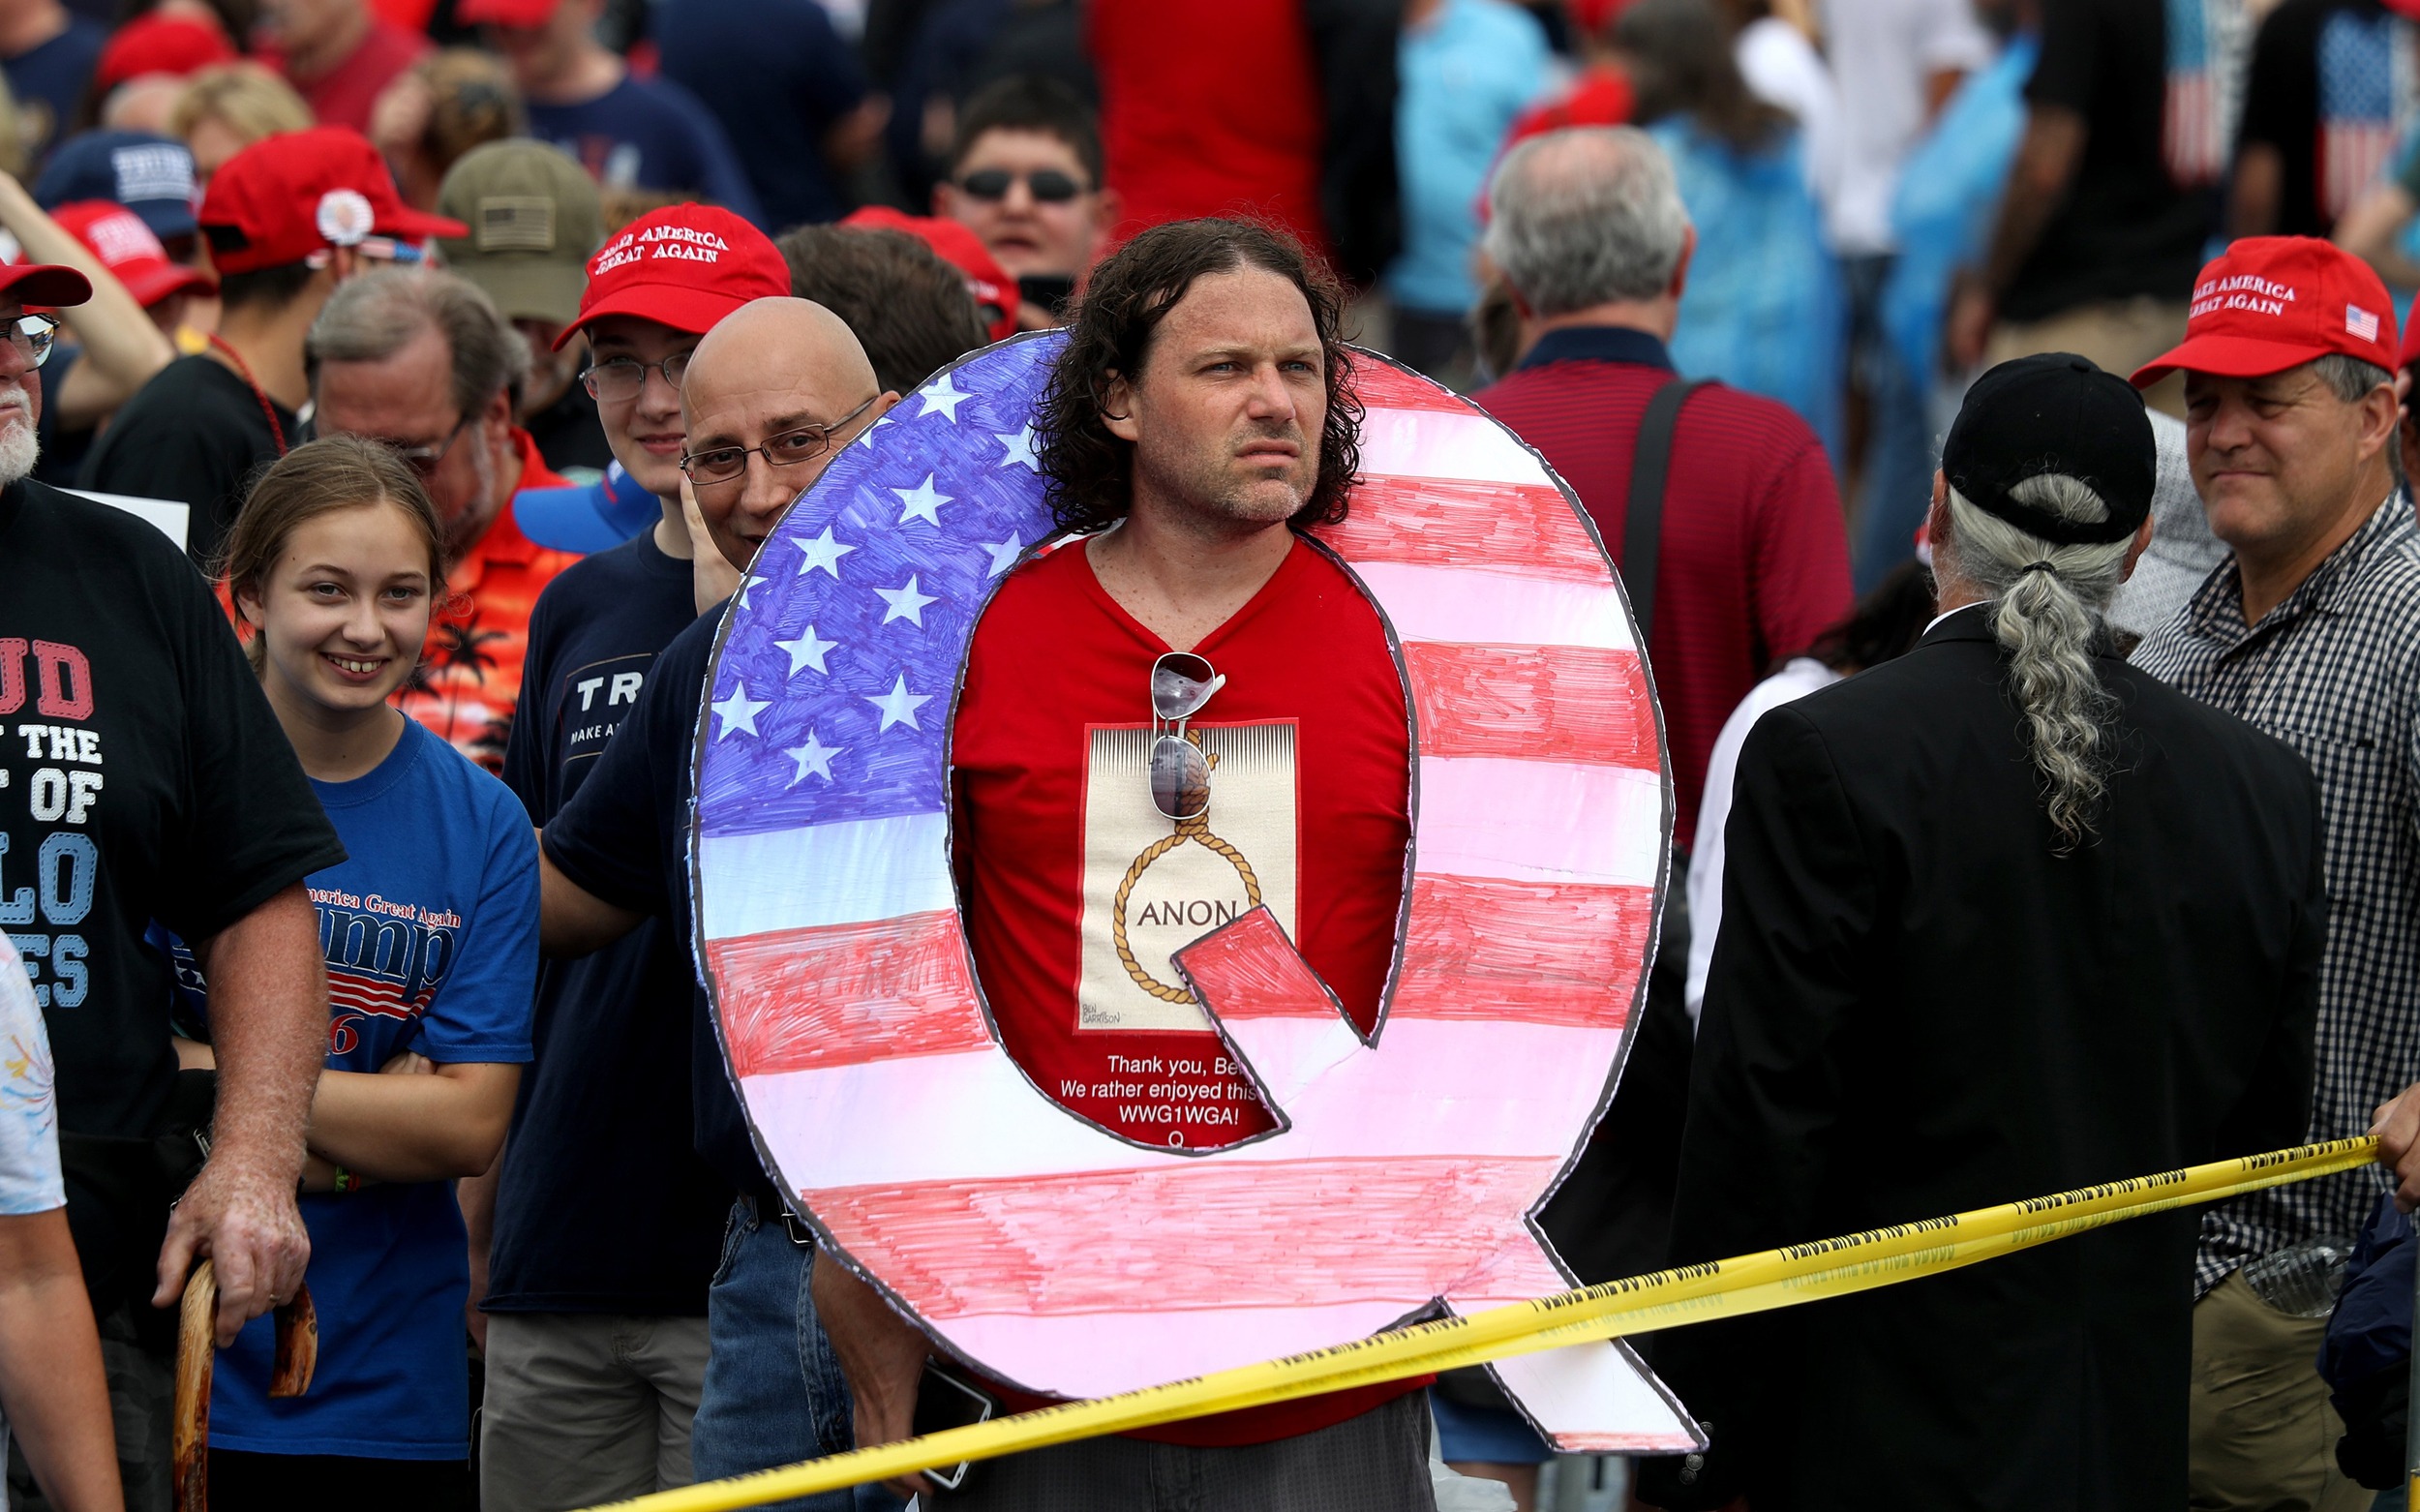 Image:  David Reinert holds a large "Q" sign while waiting to see Trump